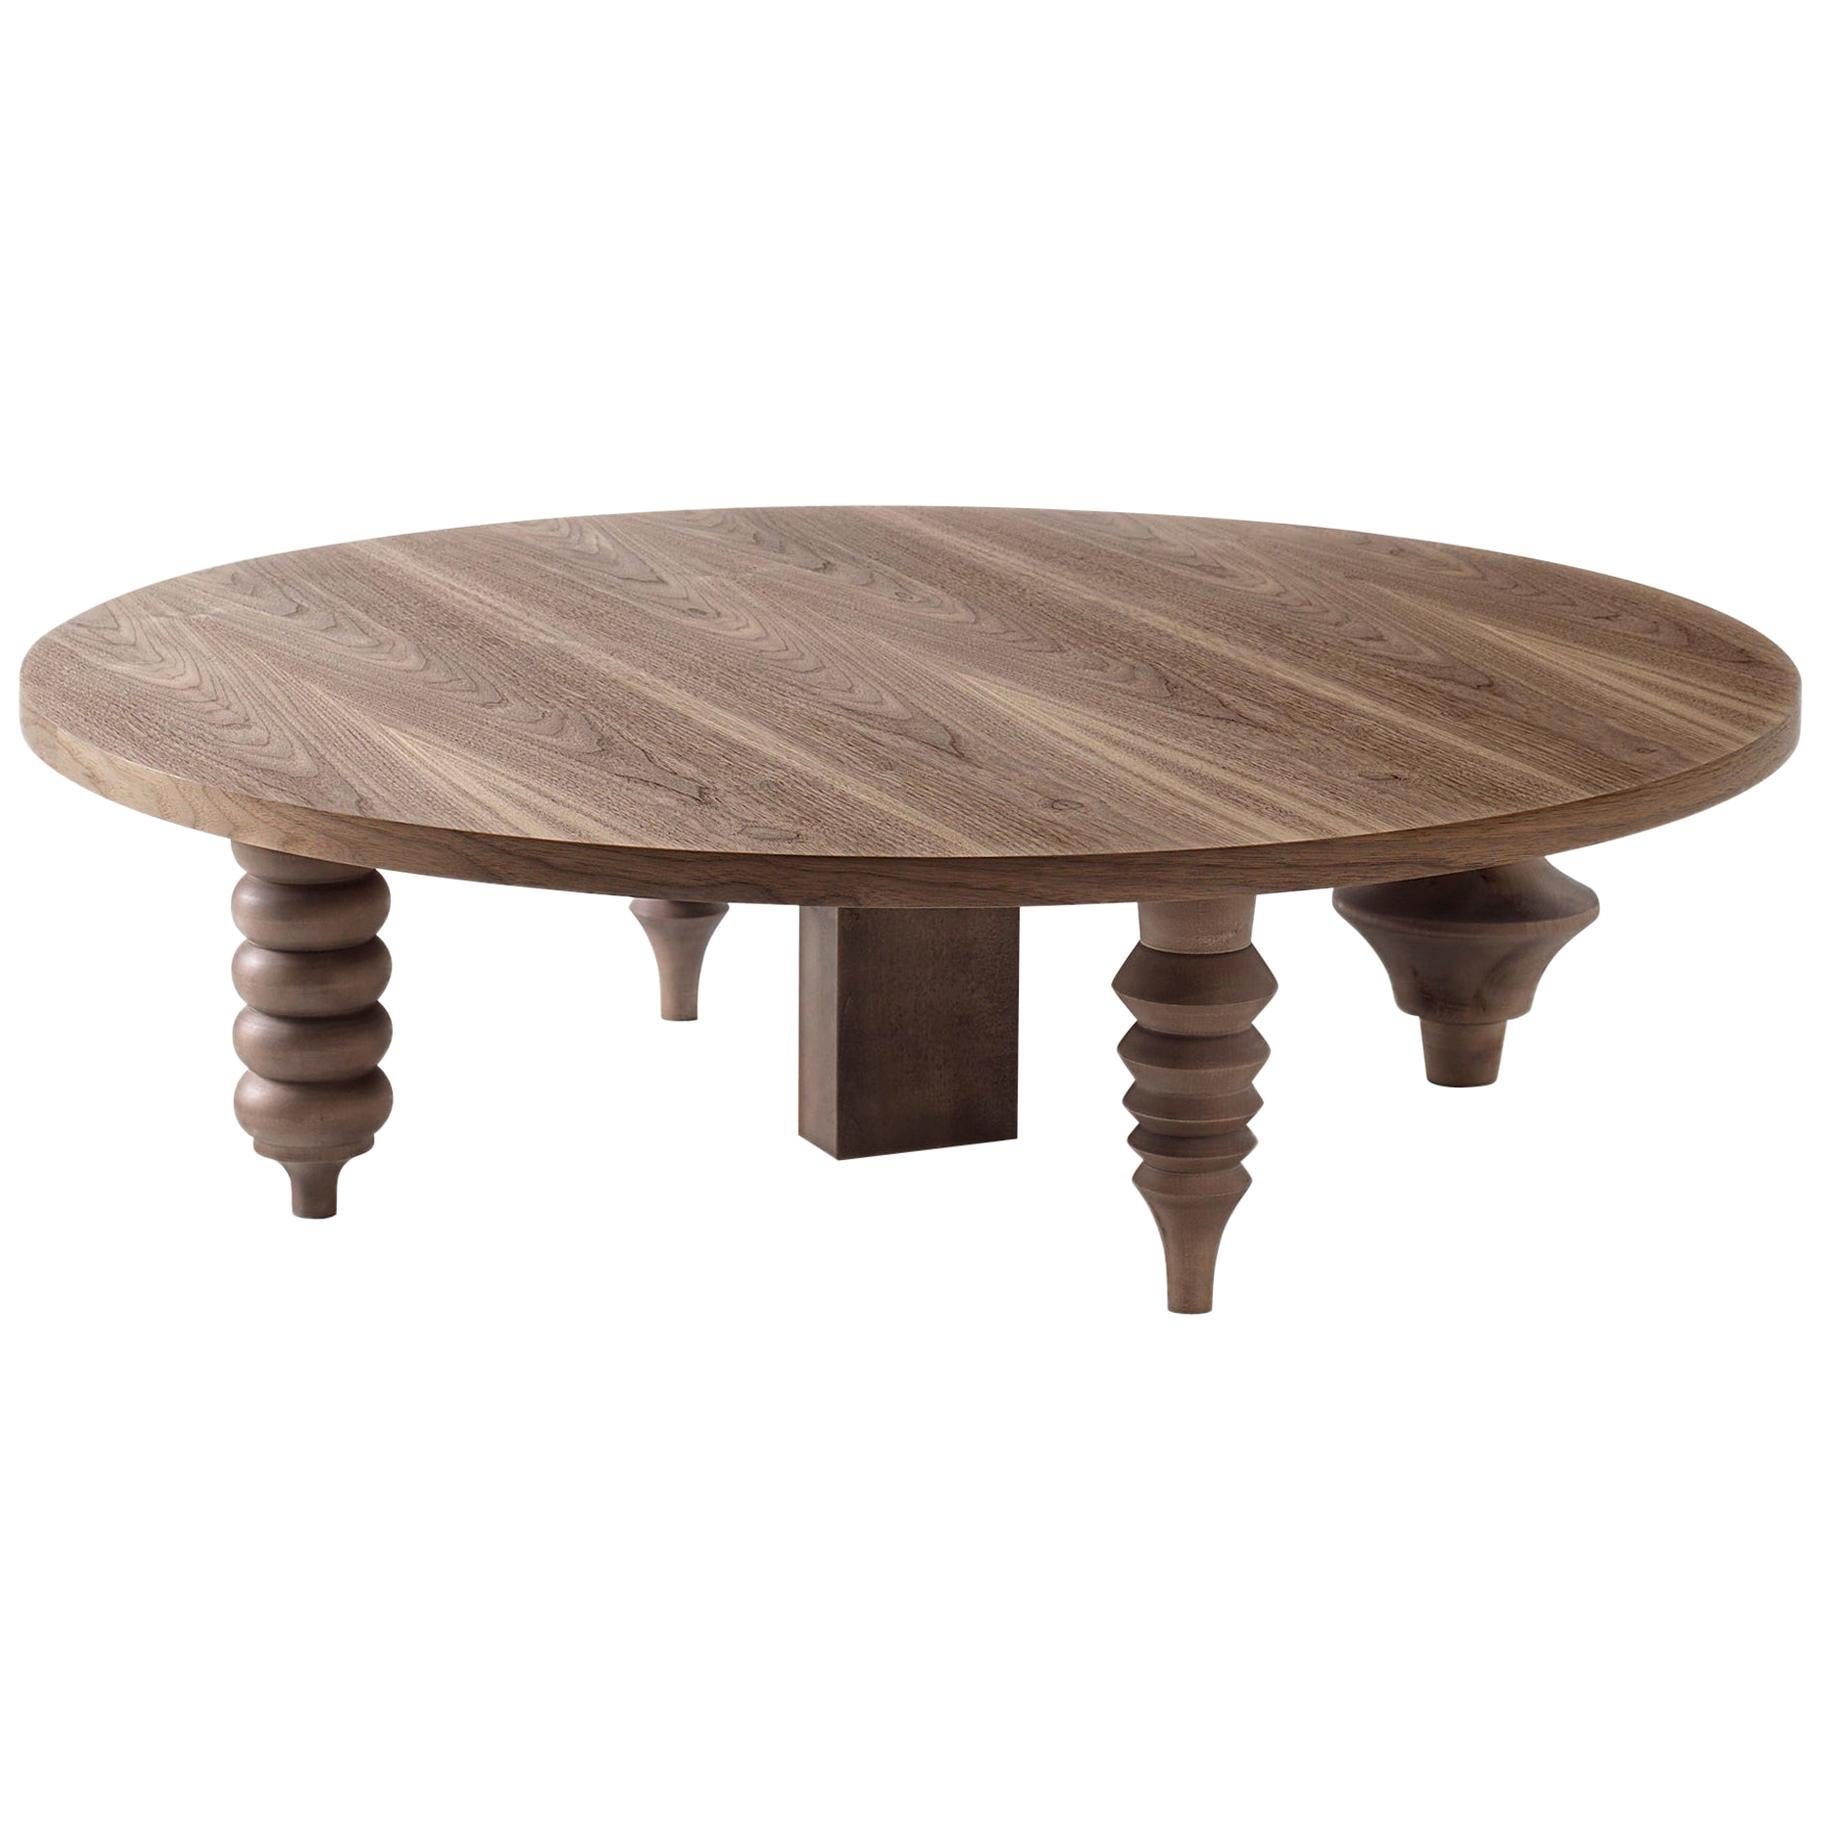 Jaime Hayon Rounded Multi Leg Low Table by BD Barcelona For Sale